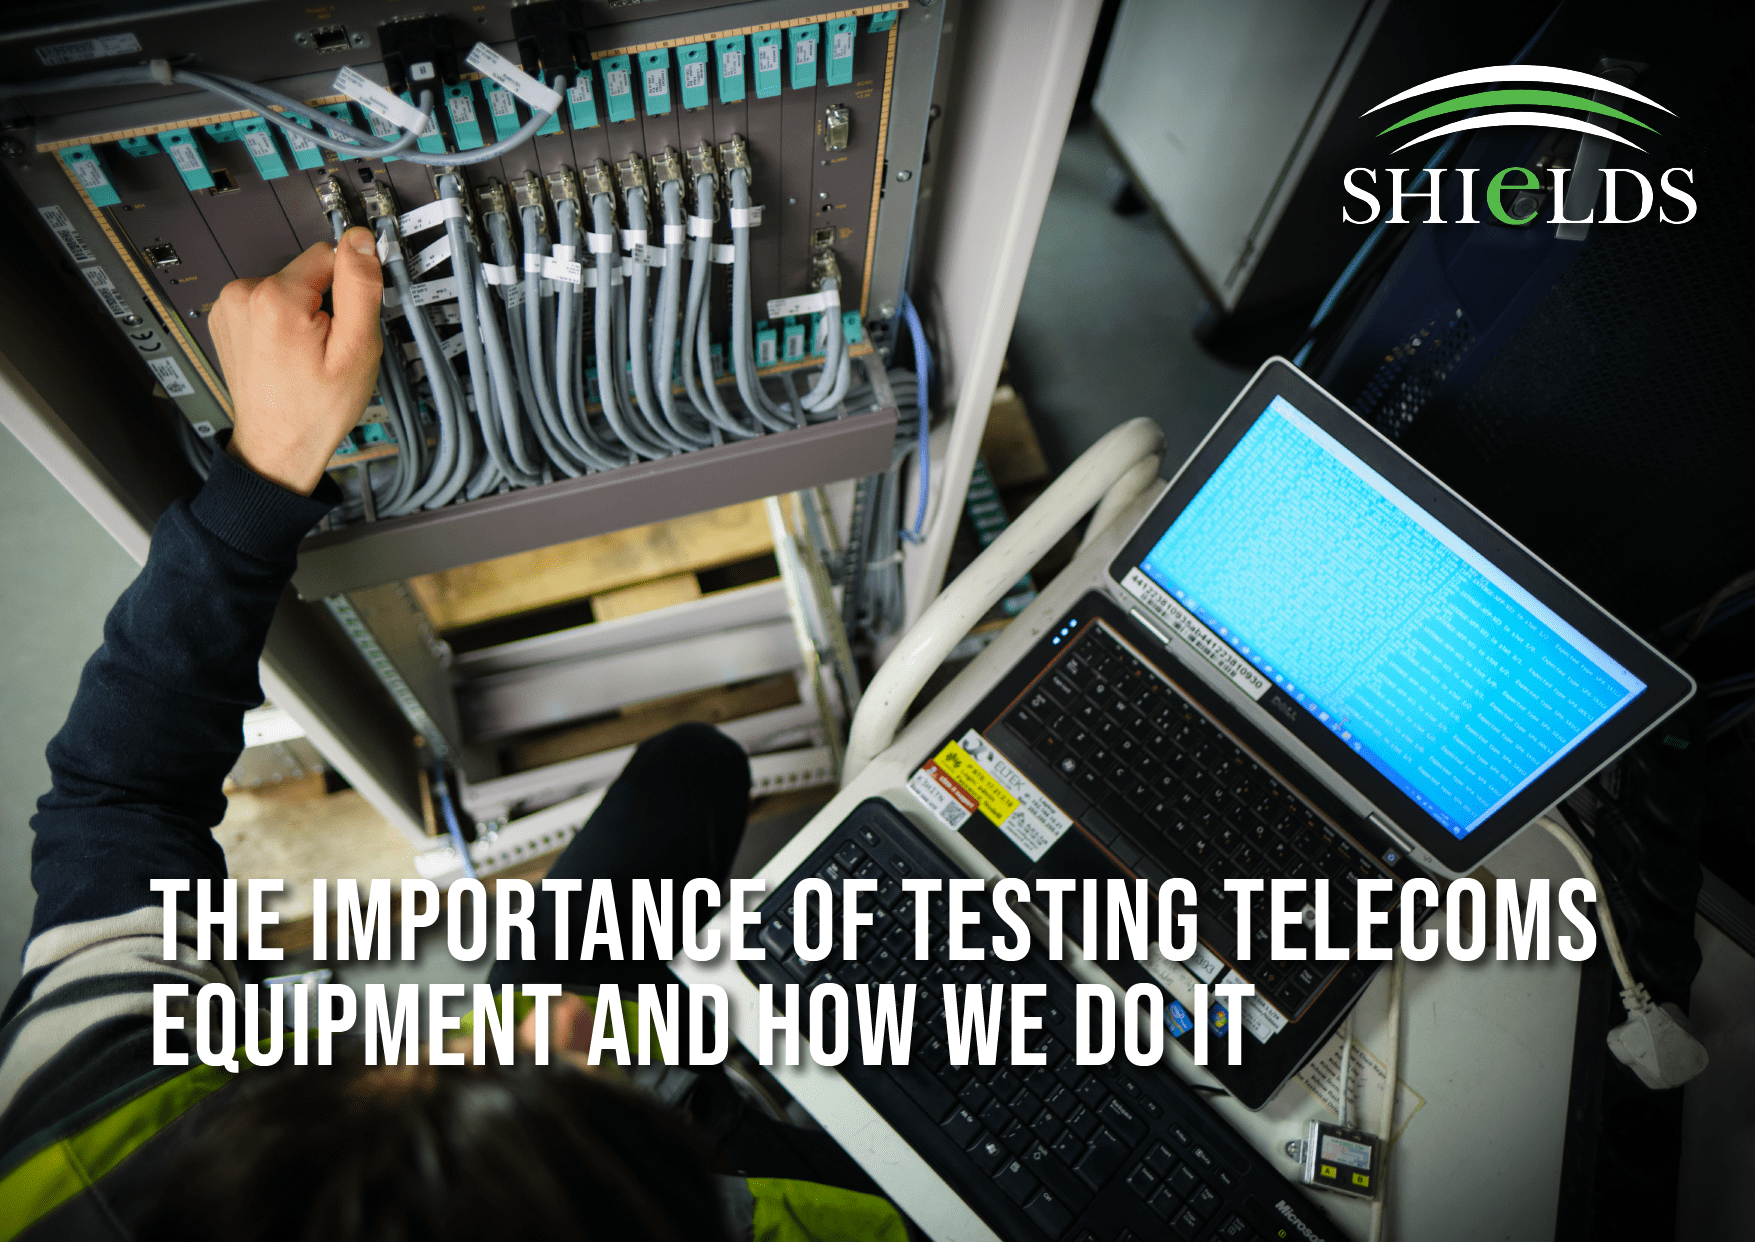 The importance of testing telecoms equipment and how we do it blog graphic header image